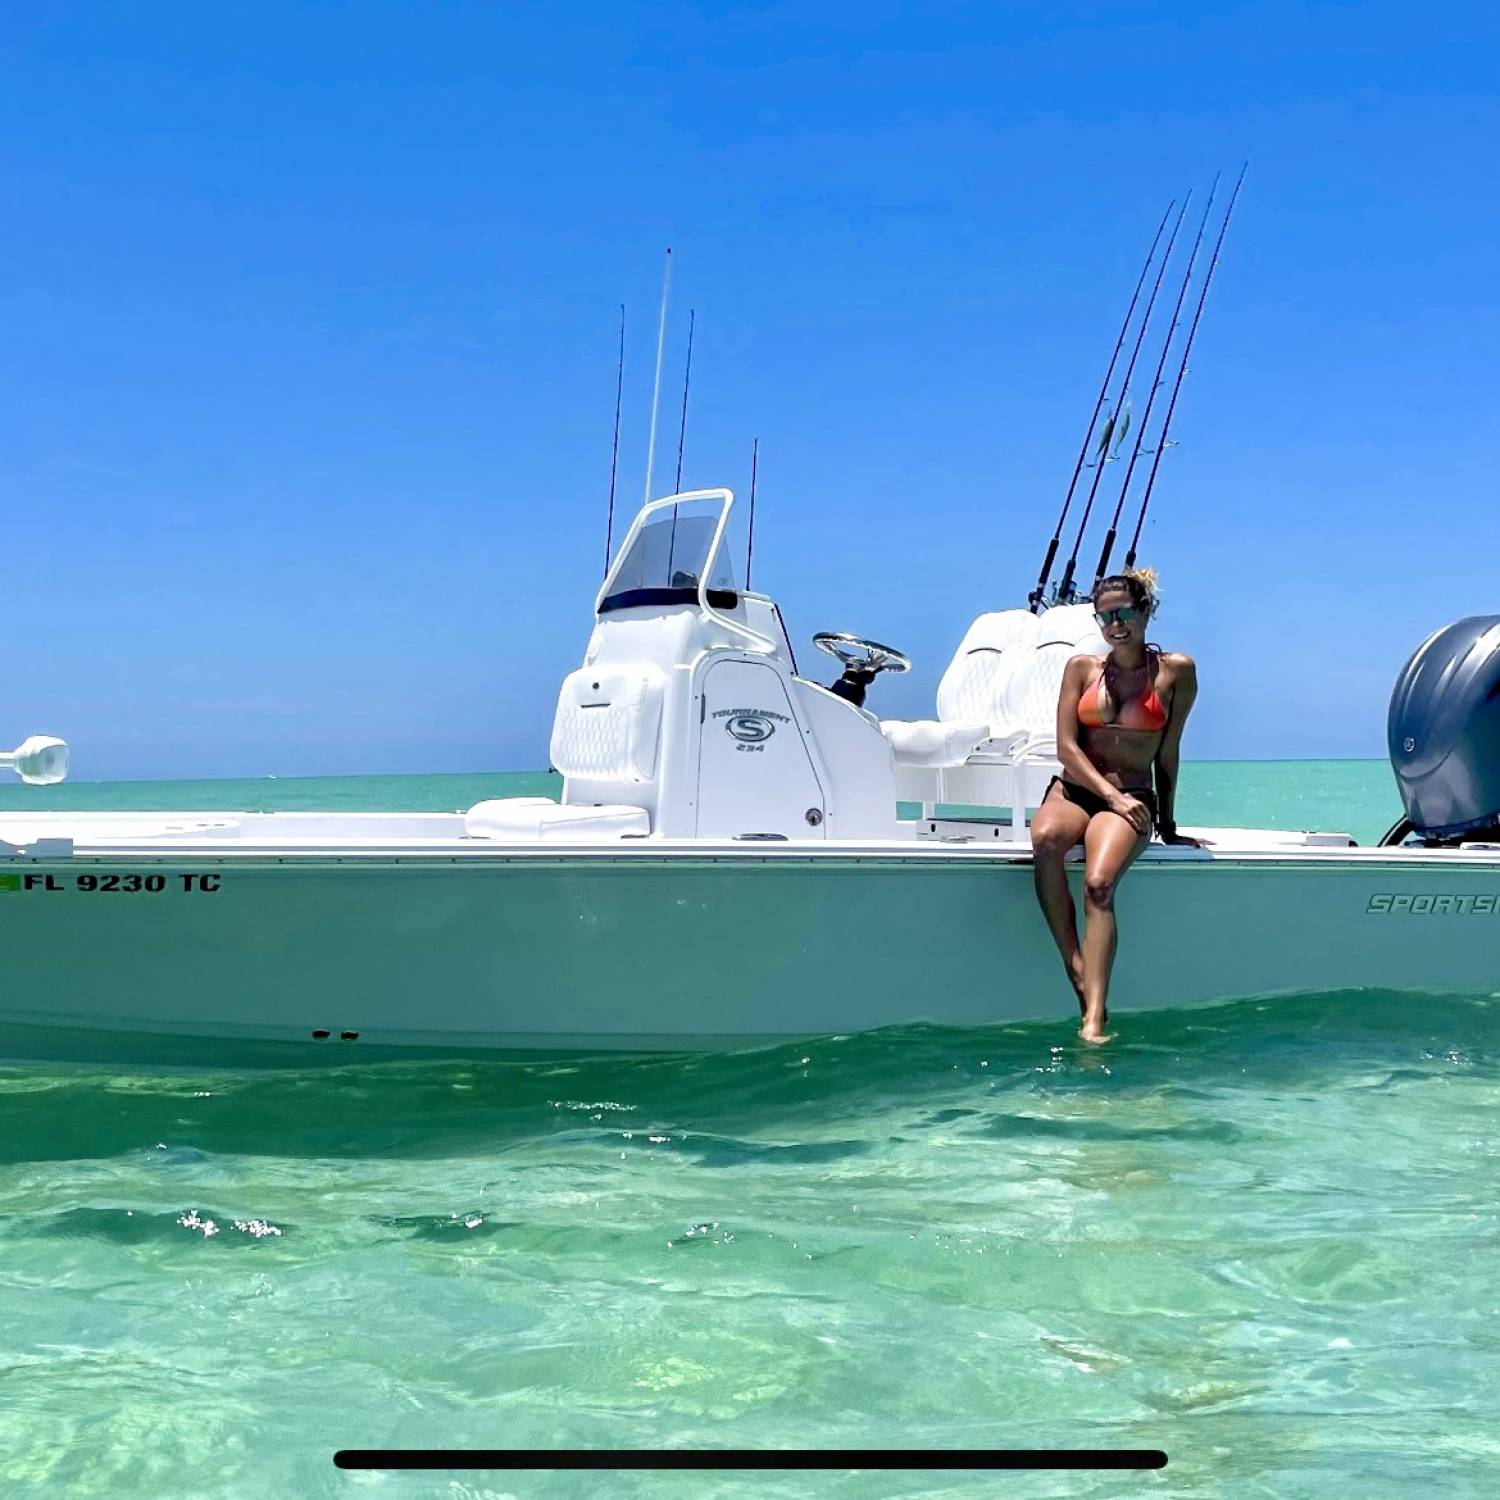 Title: Island Hopping - On board their Sportsman Tournament 234 Bay Boat - Location: Anclote Key. Participating in the Photo Contest #SportsmanJune